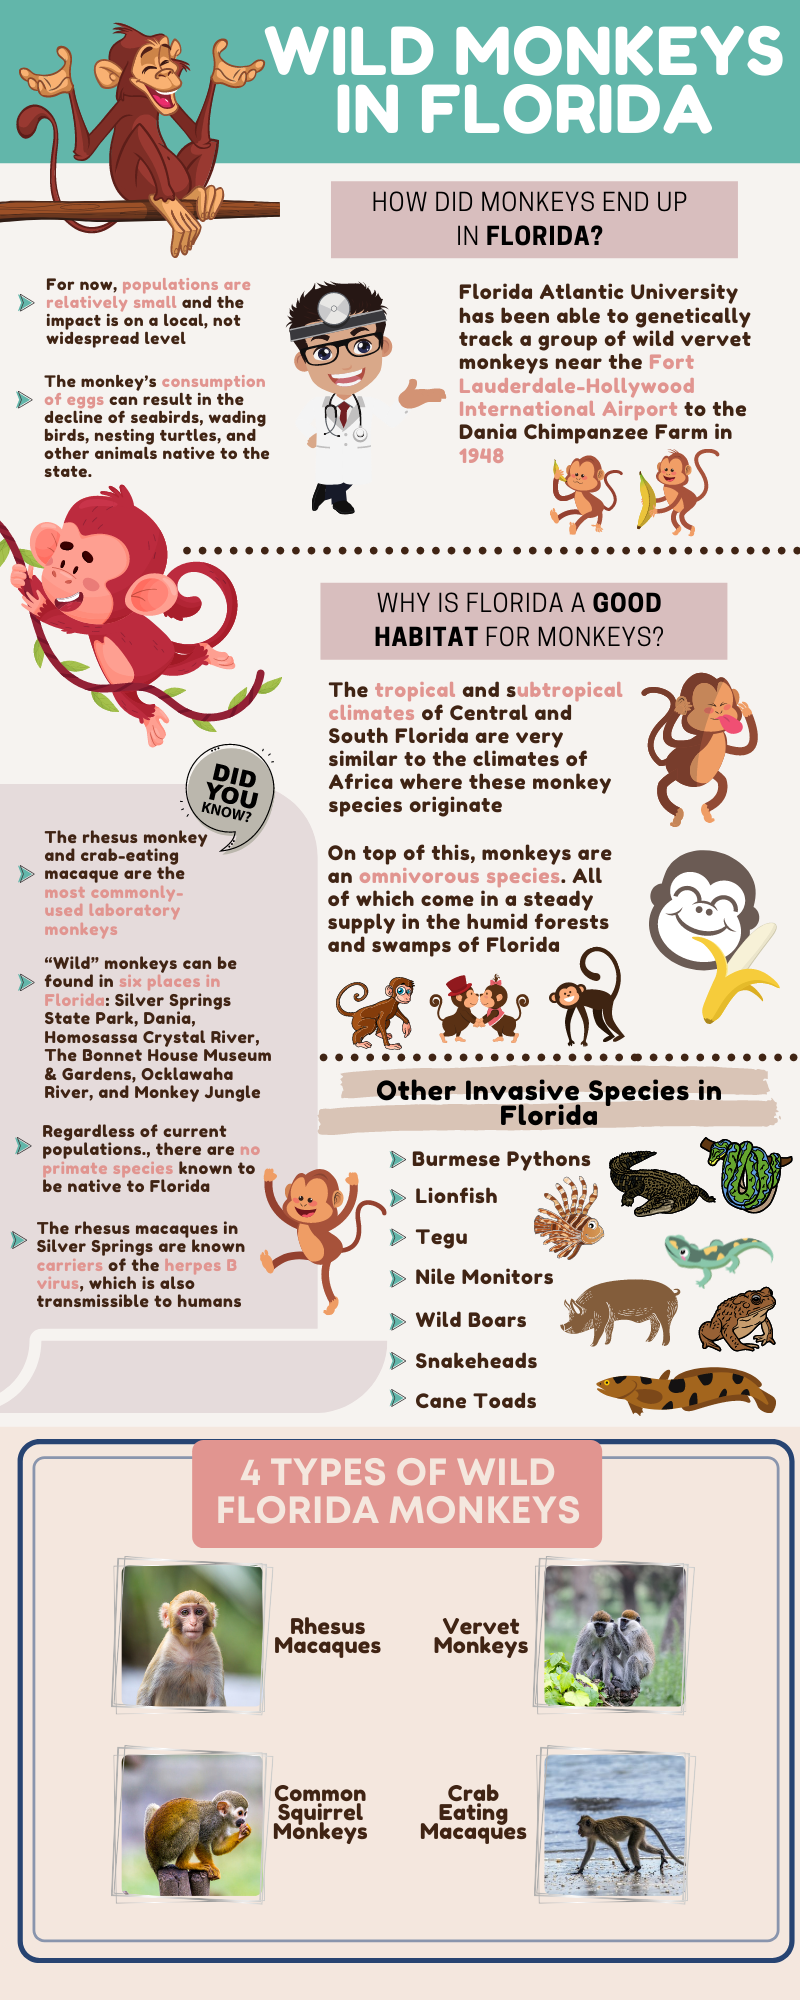 Wild monkeys in florida chart of different species and infographic with facts